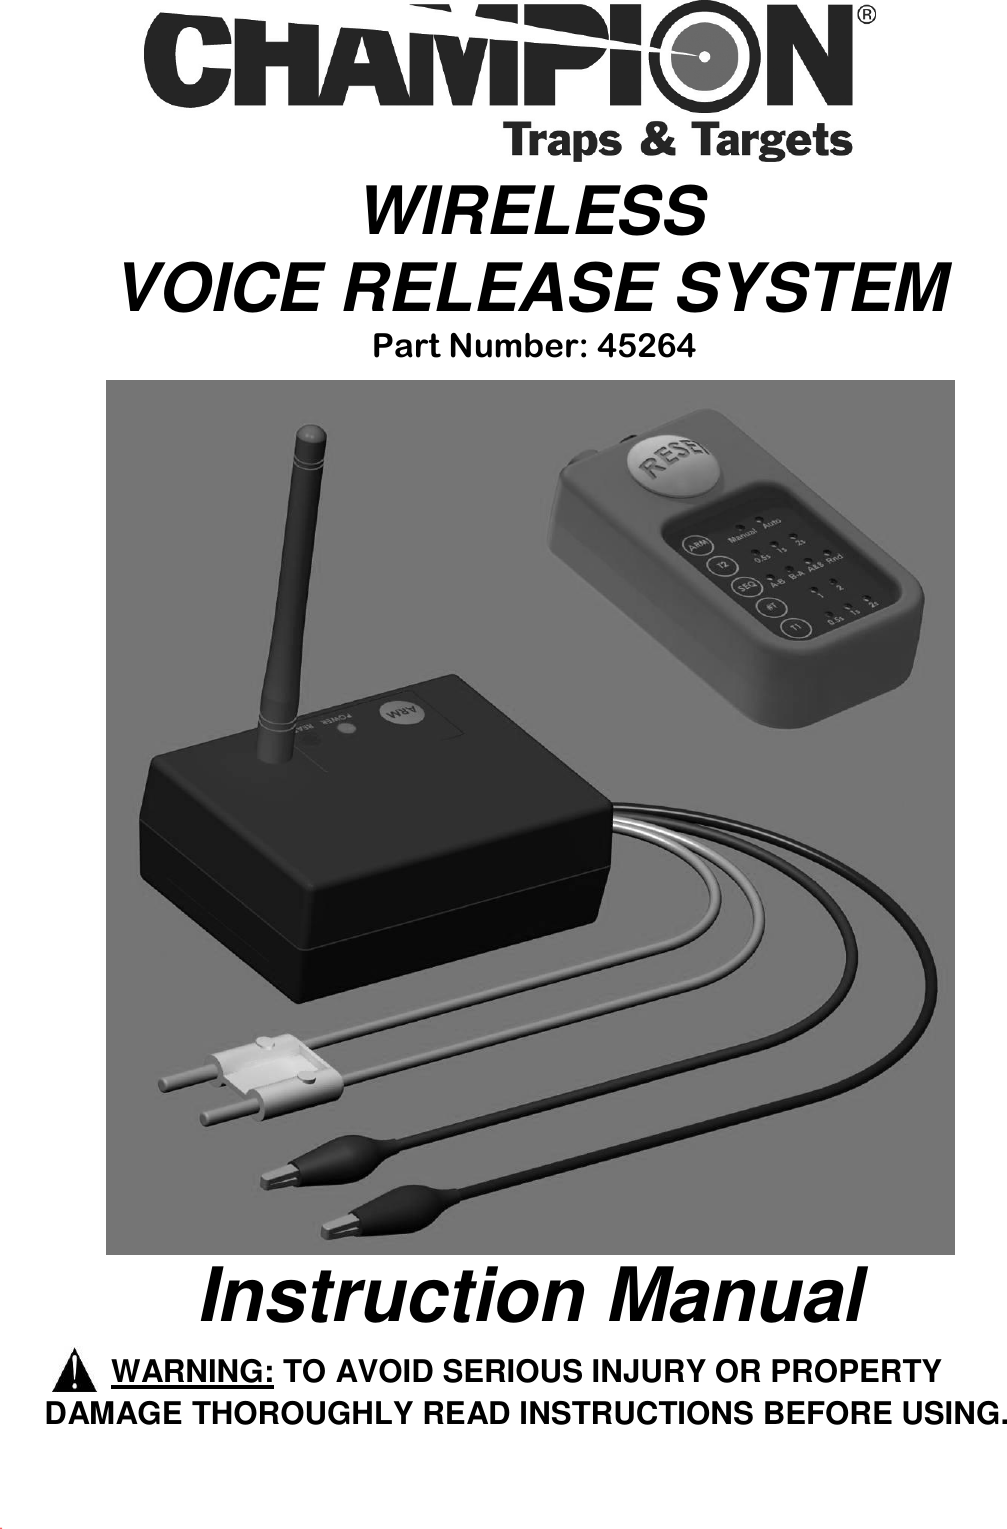 0       WIRELESS VOICE RELEASE SYSTEM  Part Number: 45264           Instruction ManualWARNING: TO AVOID SERIOUS INJURY OR PROPERTY DAMAGE THOROUGHLY READ INSTRUCTIONS BEFORE USING.       